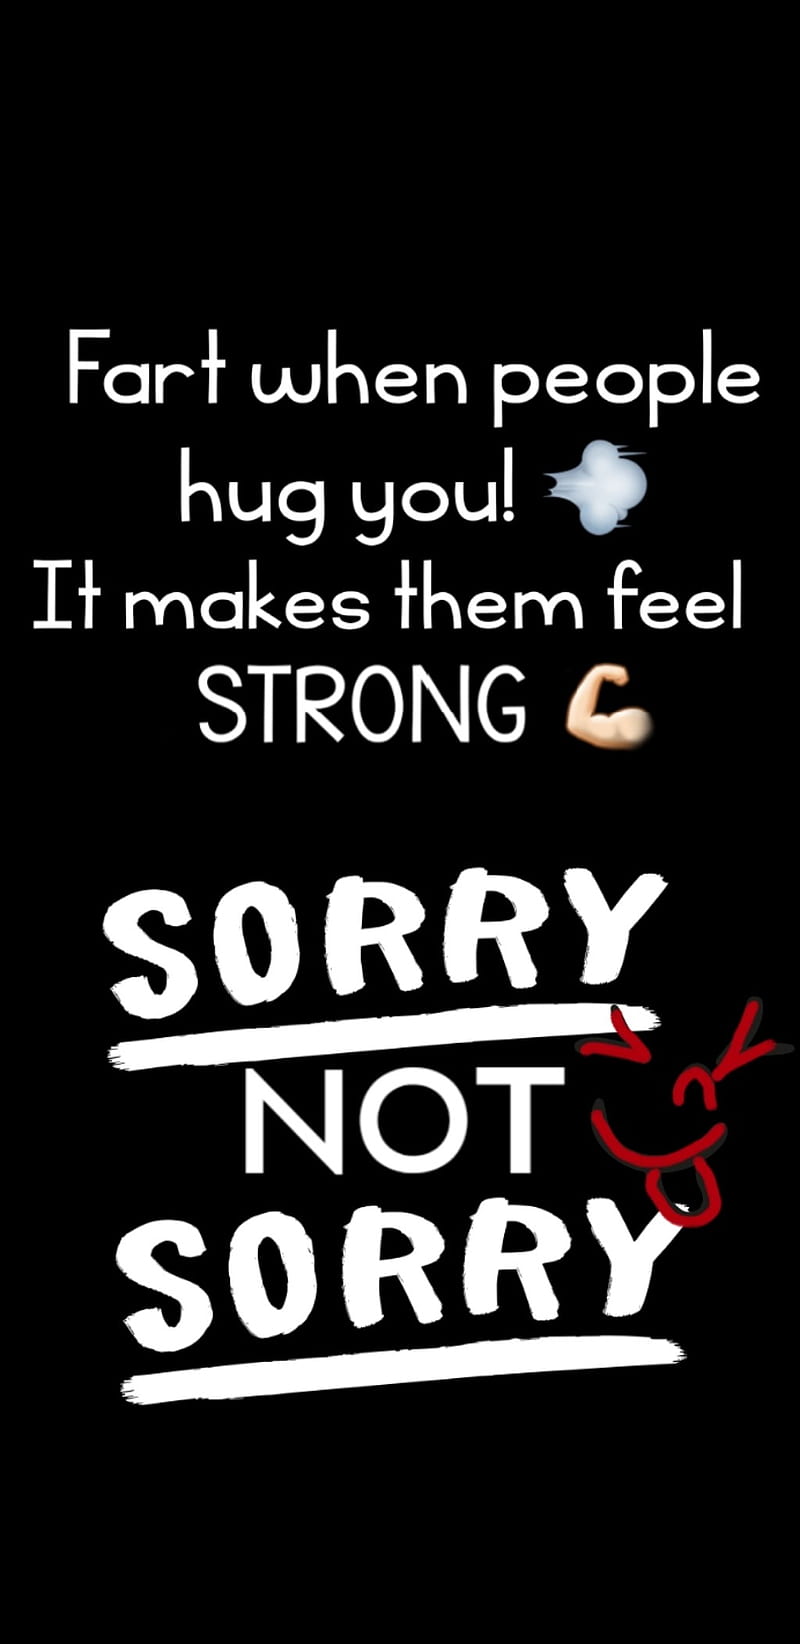 Fart when hugged, hug, sorry, sorry not sorry, strong, HD phone wallpaper